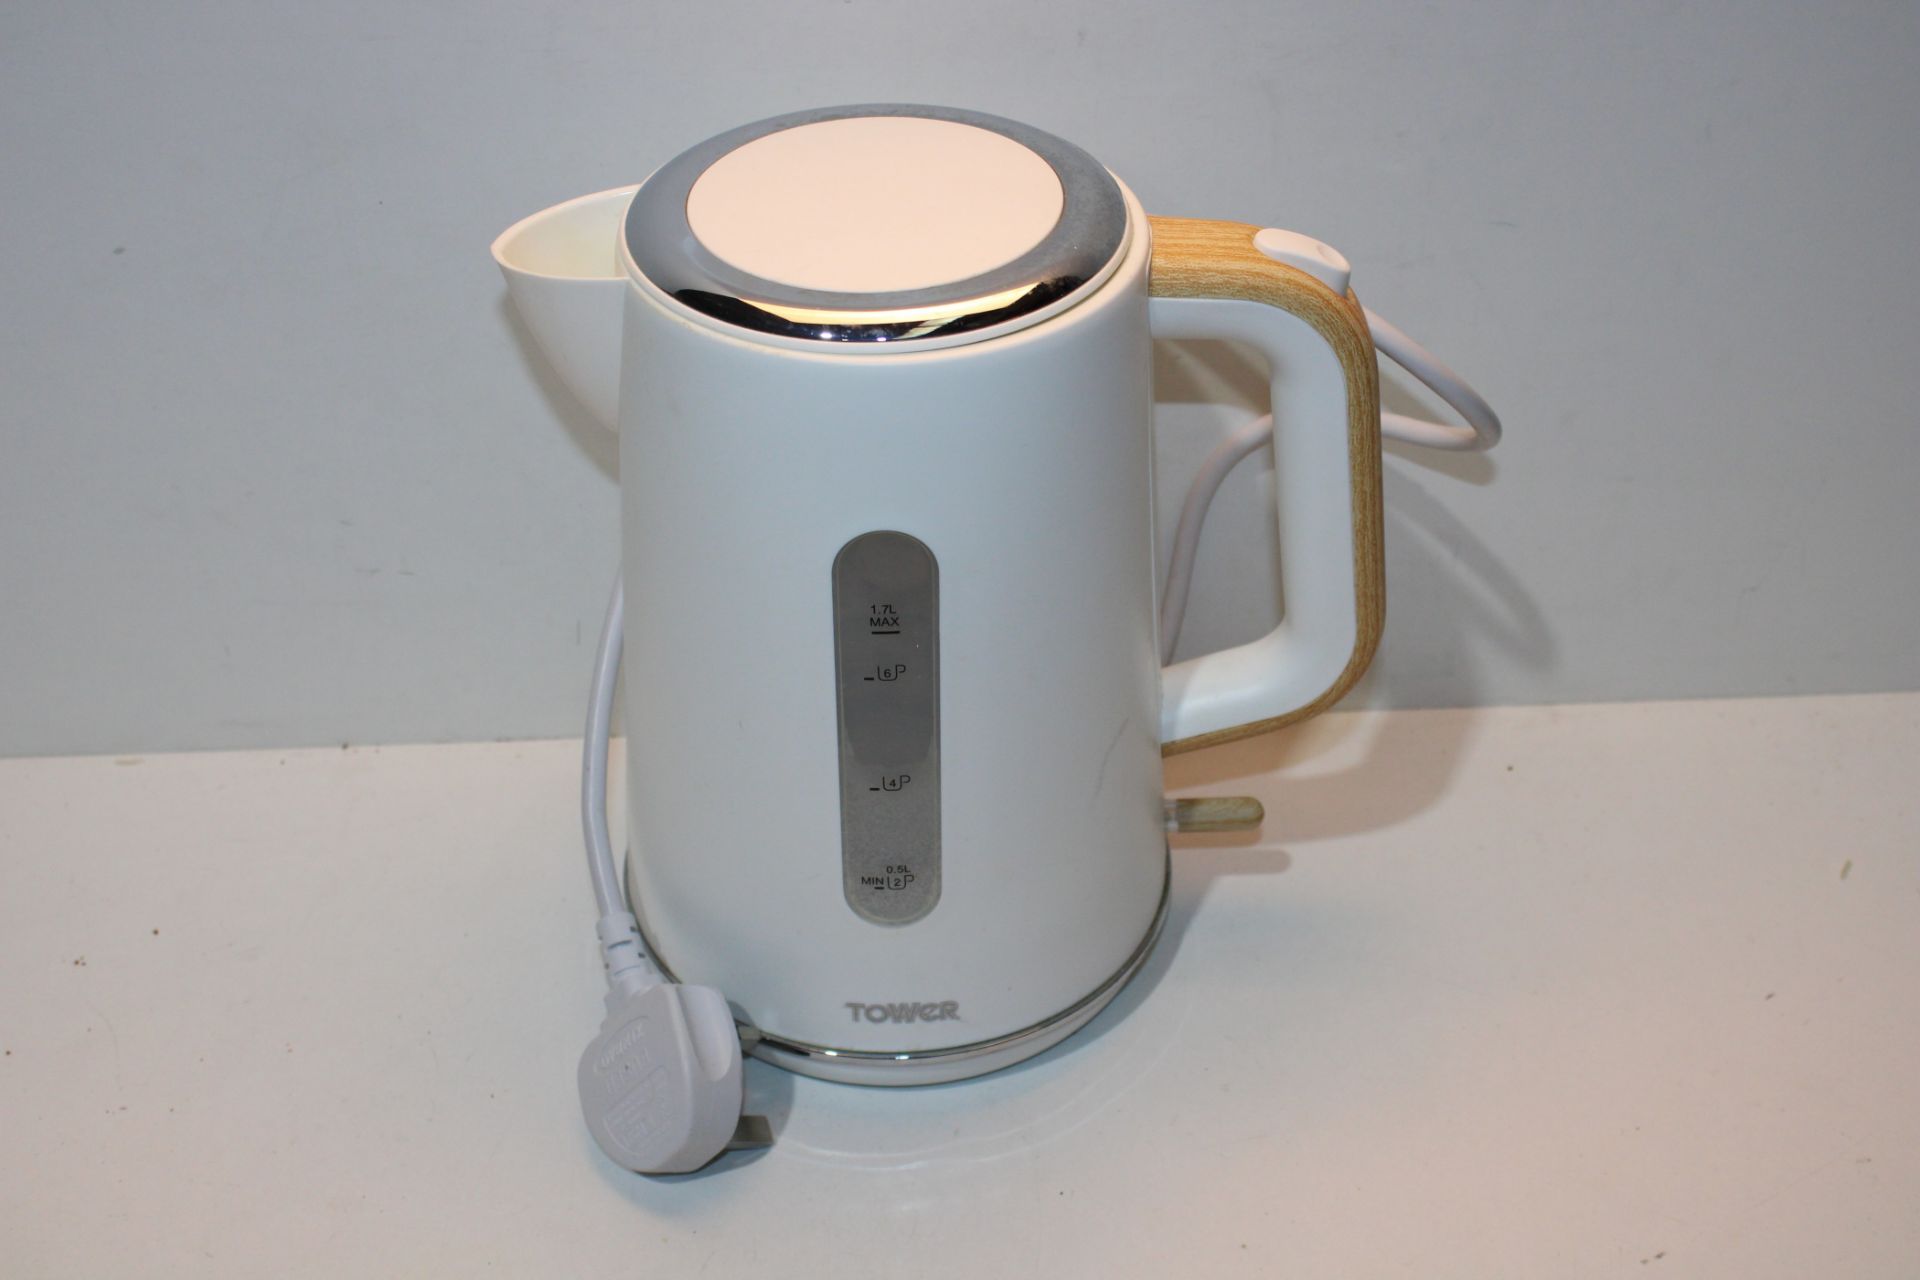 Tower Scandi T10037 Kettle with Rapid Boil and Boil Dry Protection, 1.7 Litre, 3 kW, White £29.